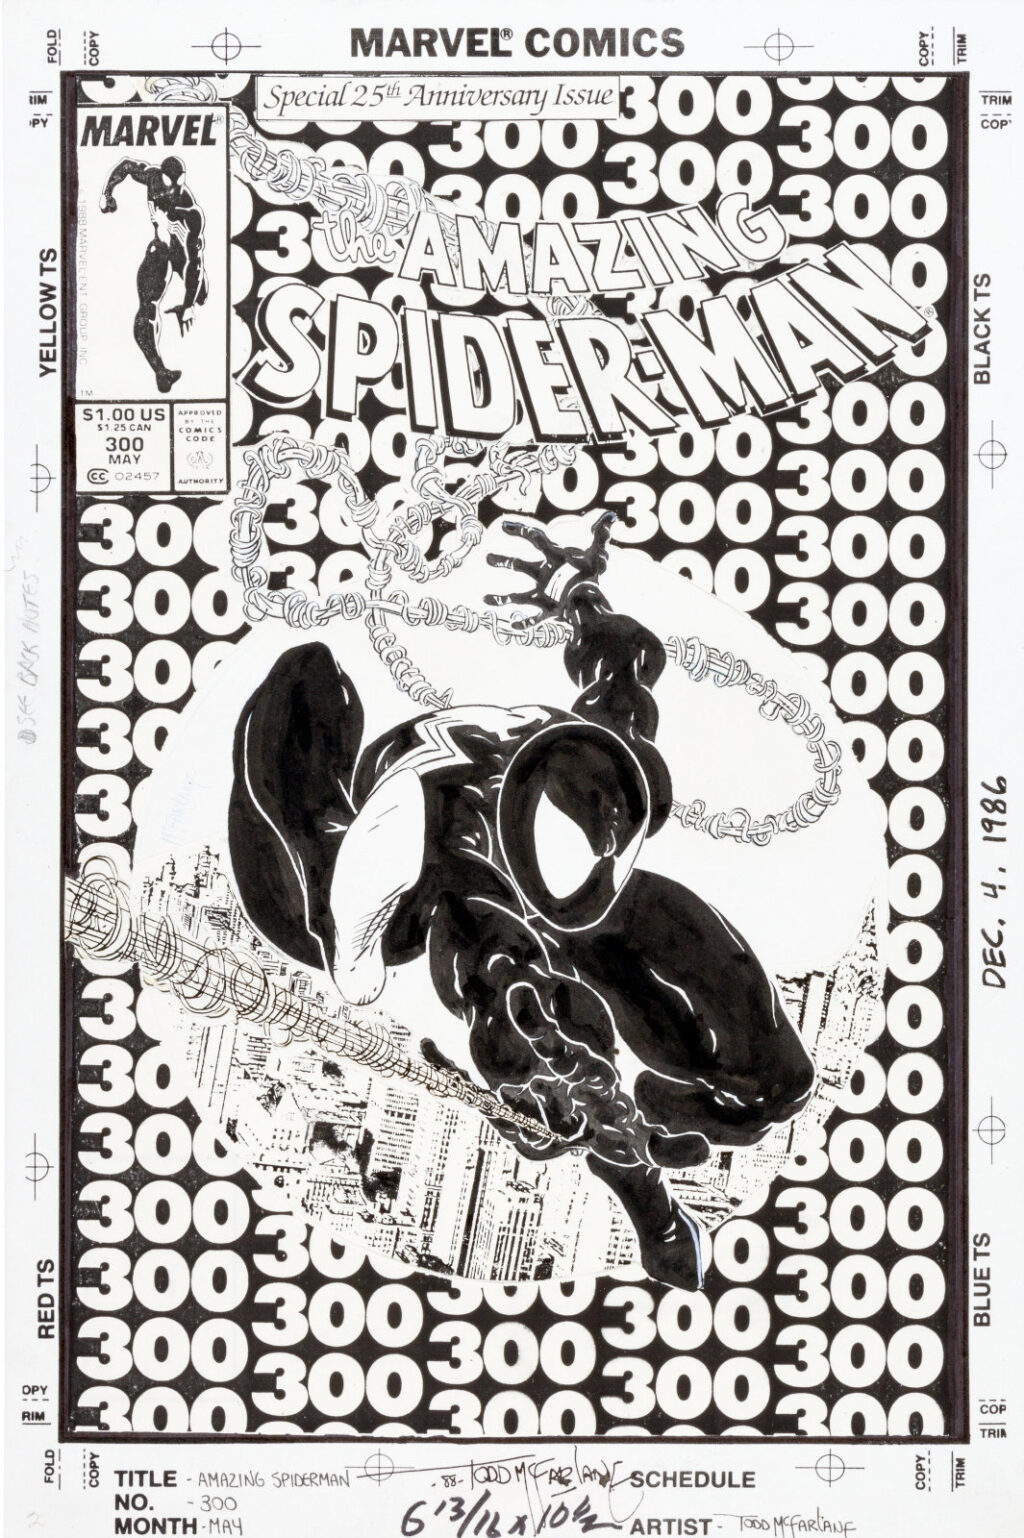 Amazing Spider Man issue 300 cover by Todd McFarlane